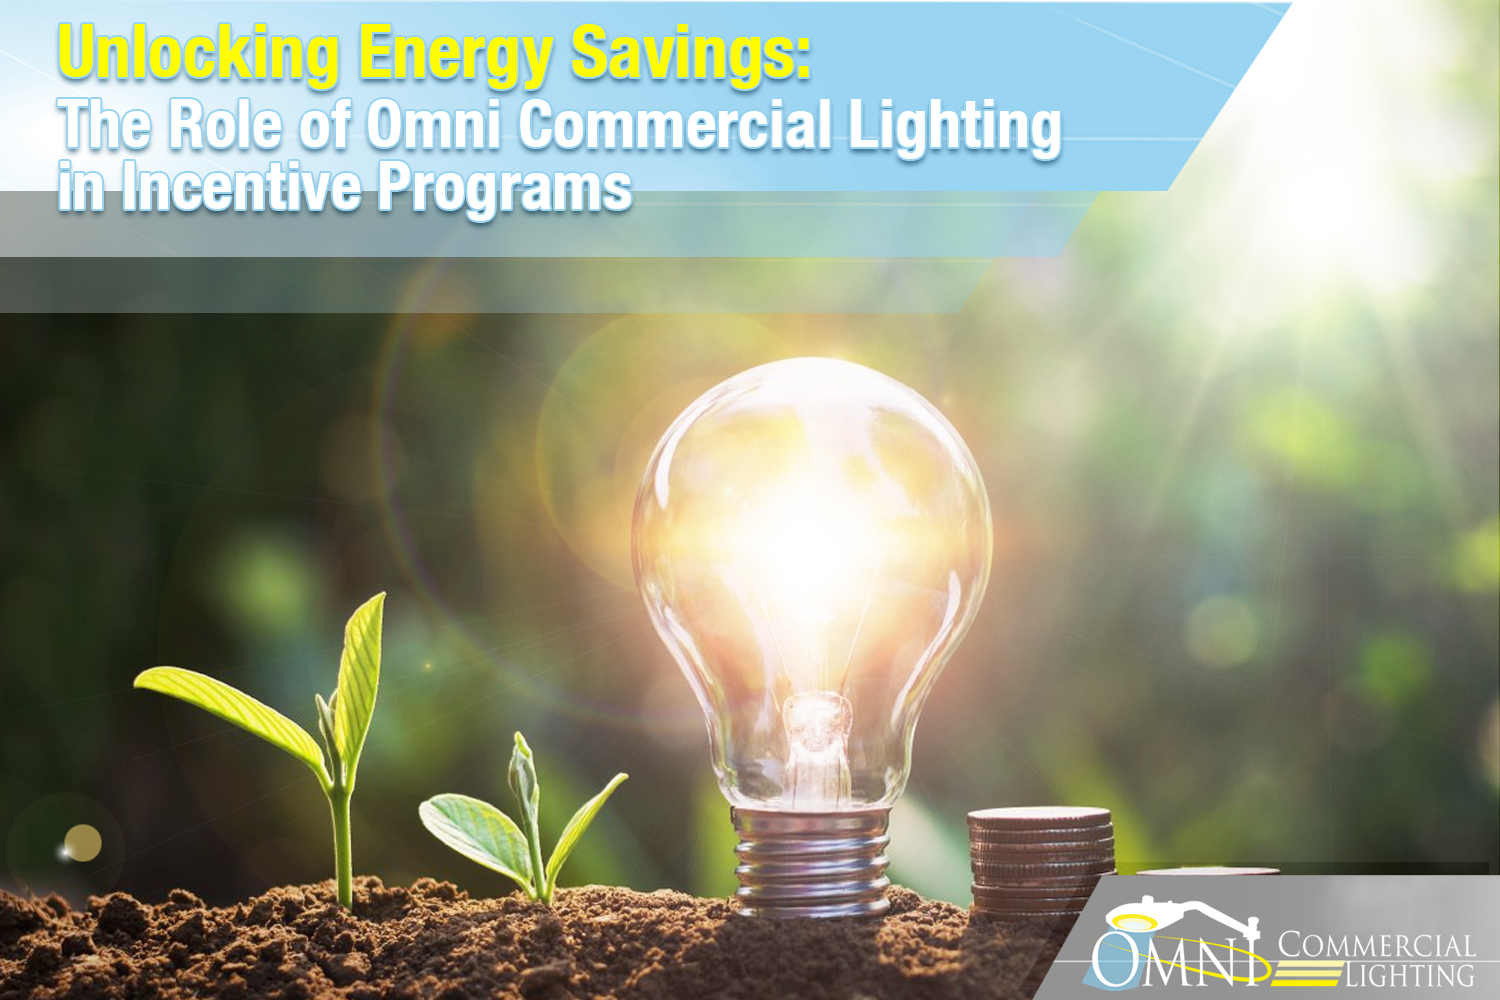 Unlocking Energy Savings: The Role of Omni Commercial Lighting in Incentive Programs